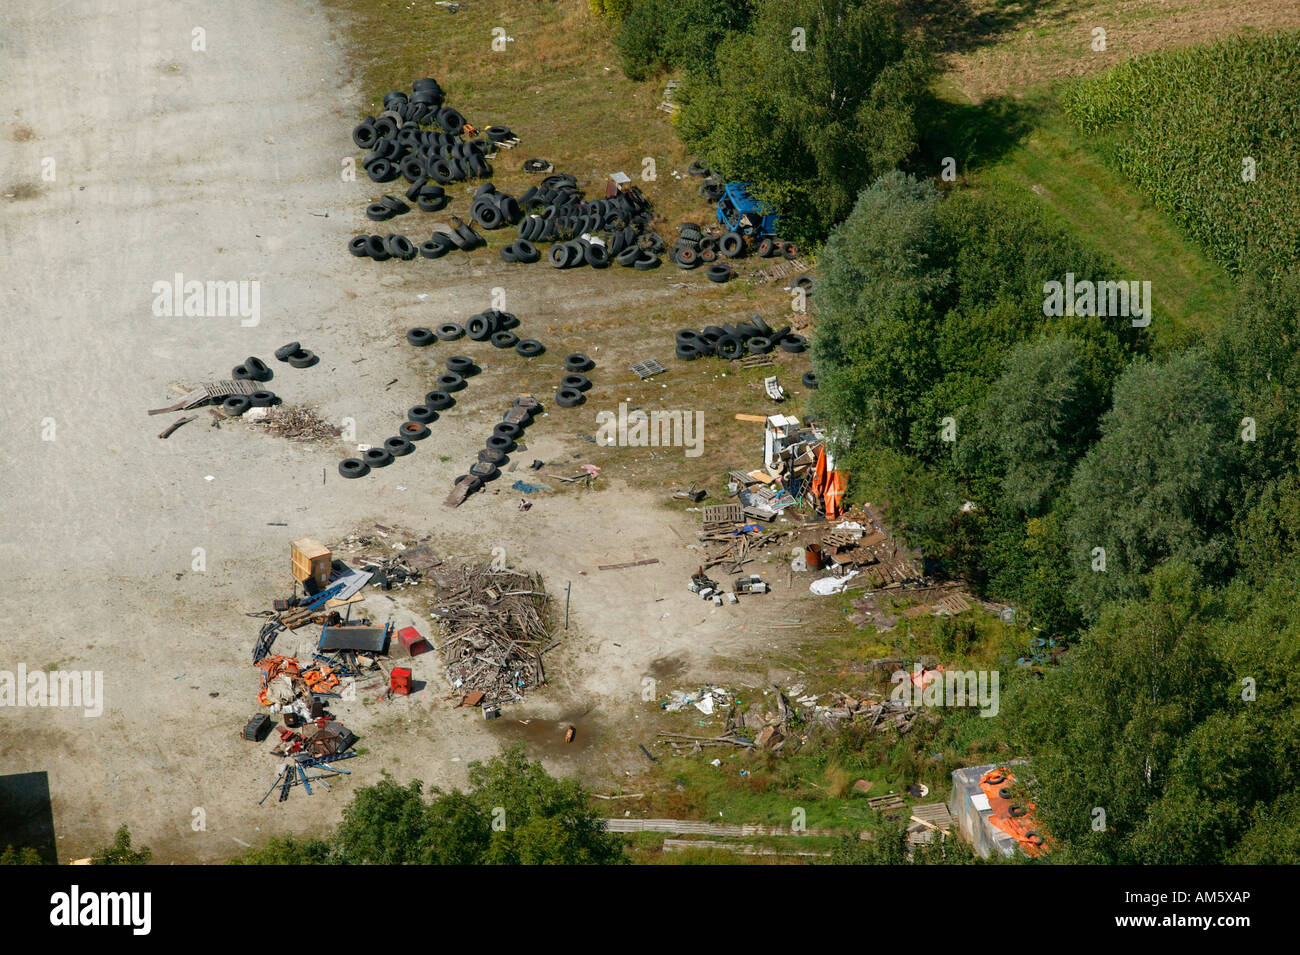 Illegal waste disposal site, Germany Stock Photo